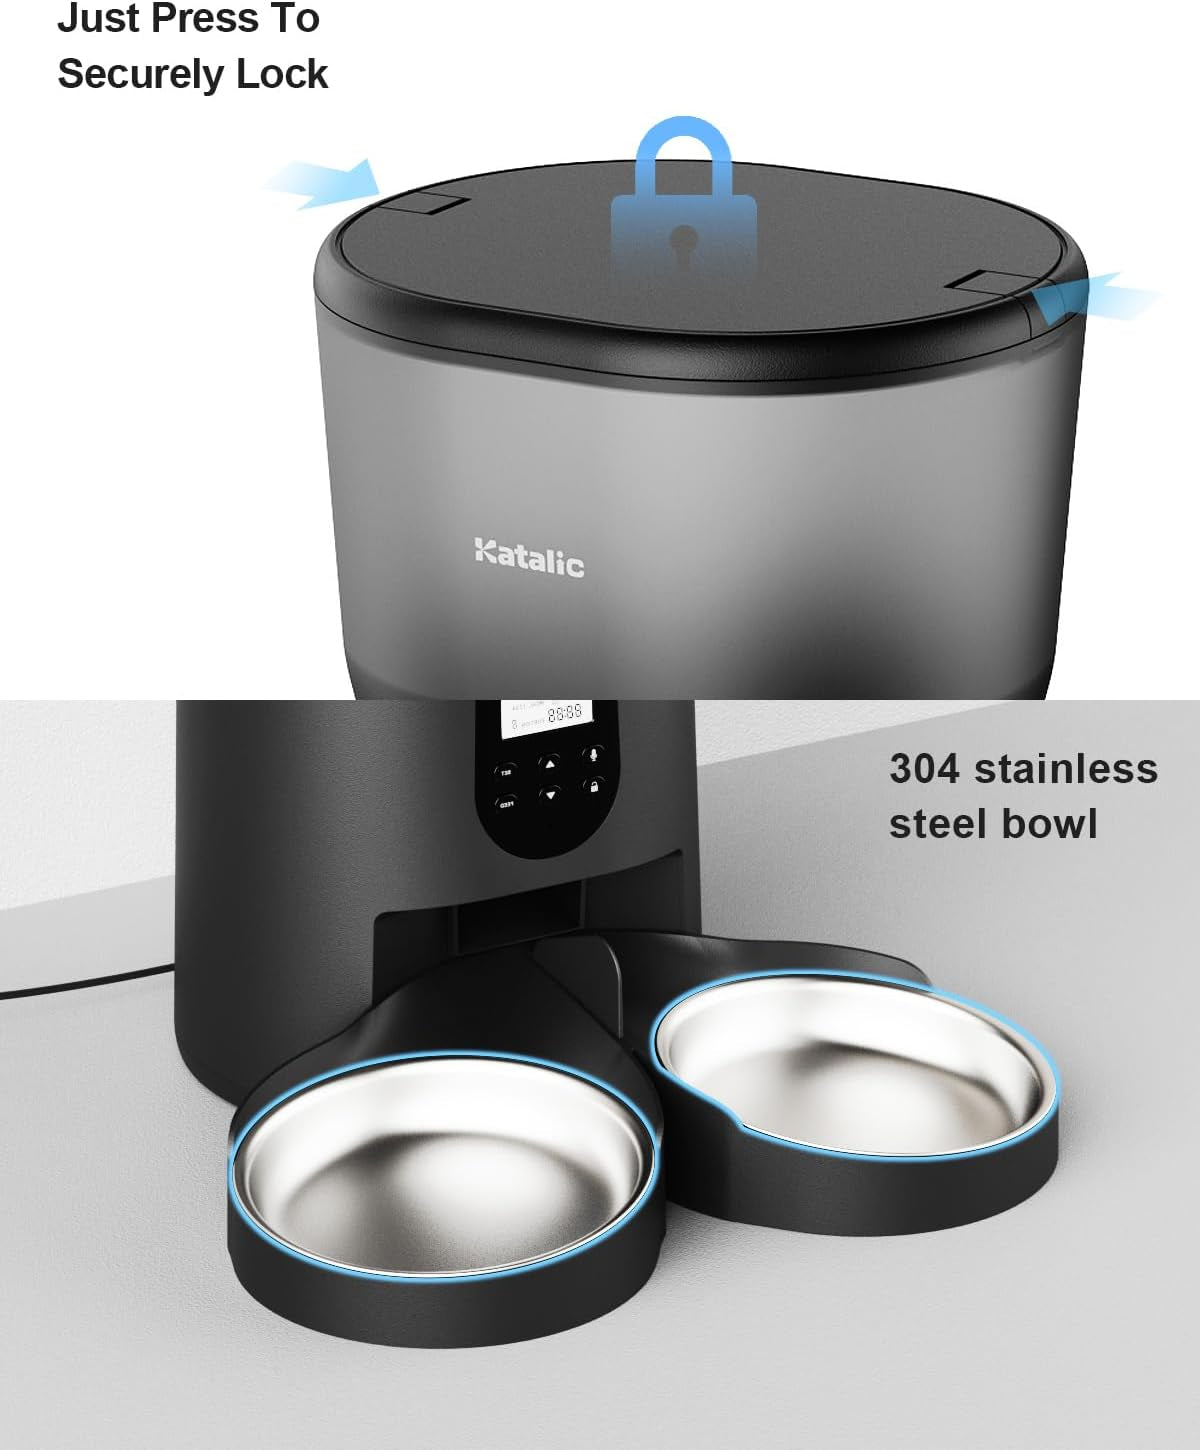 Dual Automatic Cat Feeder with 6L Capacity and Stainless Steel Bowls - Programmable Timer and Meal Call Feature